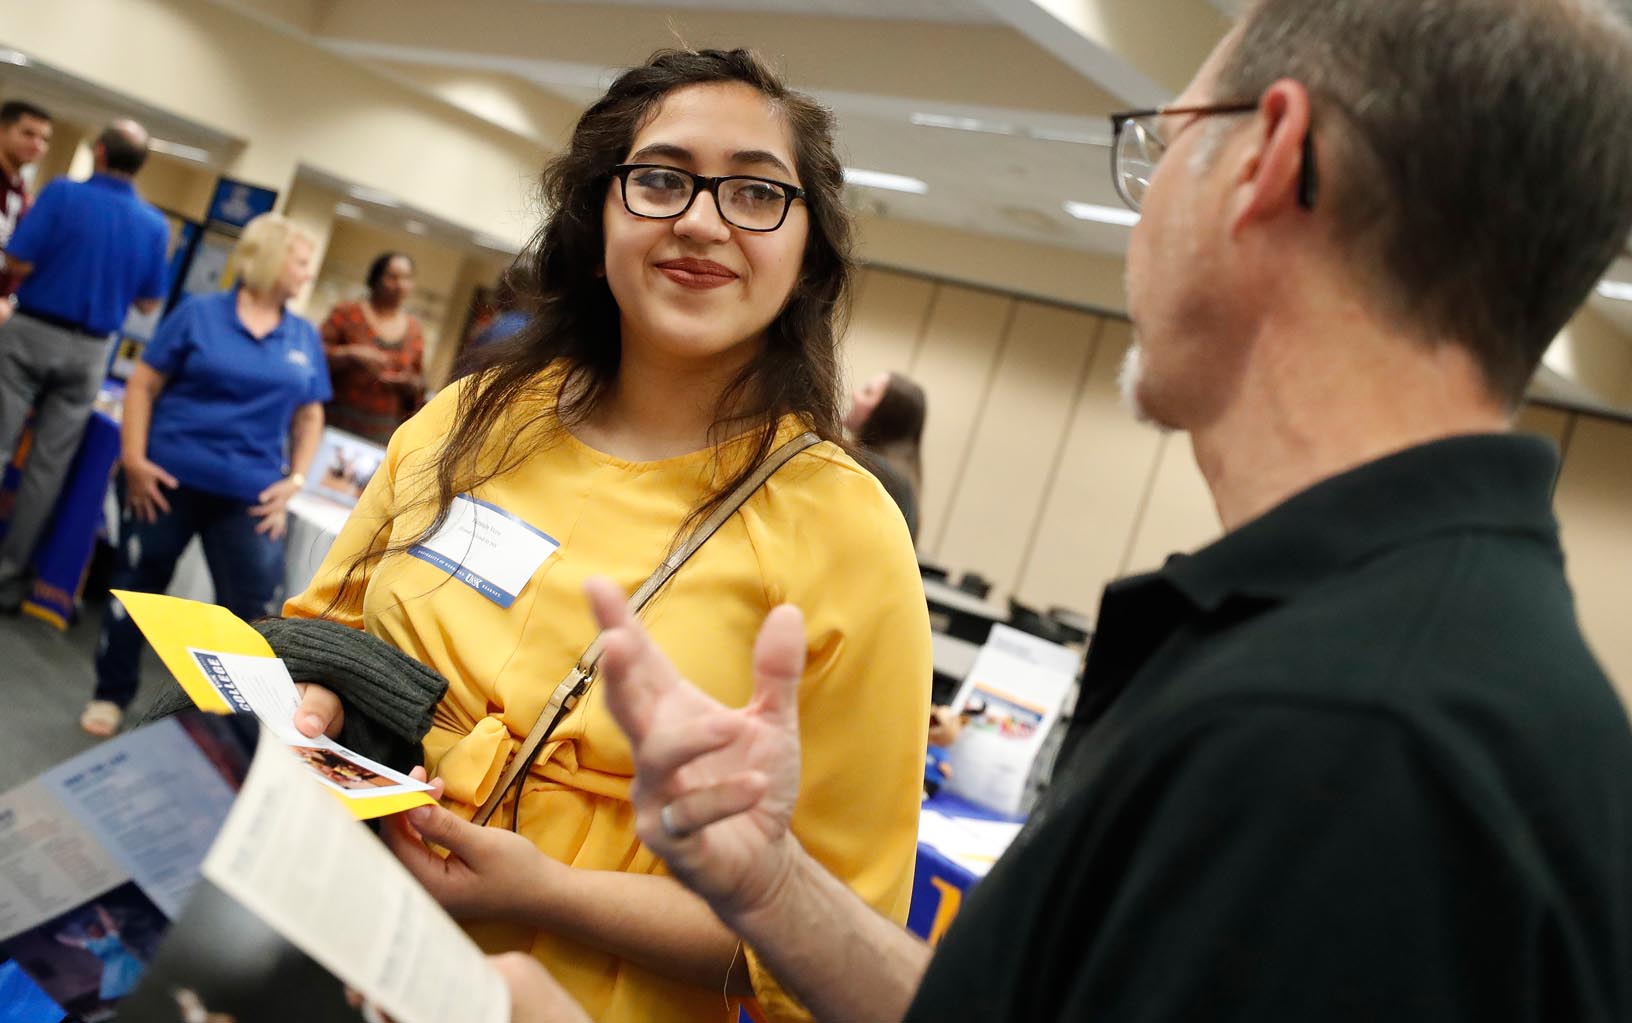 Yazmin Vera of Grand Island Senior High School meets with UNK Theatre faculty Darin Himmerich Wednesday at UNK’s Multicultural Student Leaders Day. (Photo by Corbey R. Dorsey, UNK Communications)